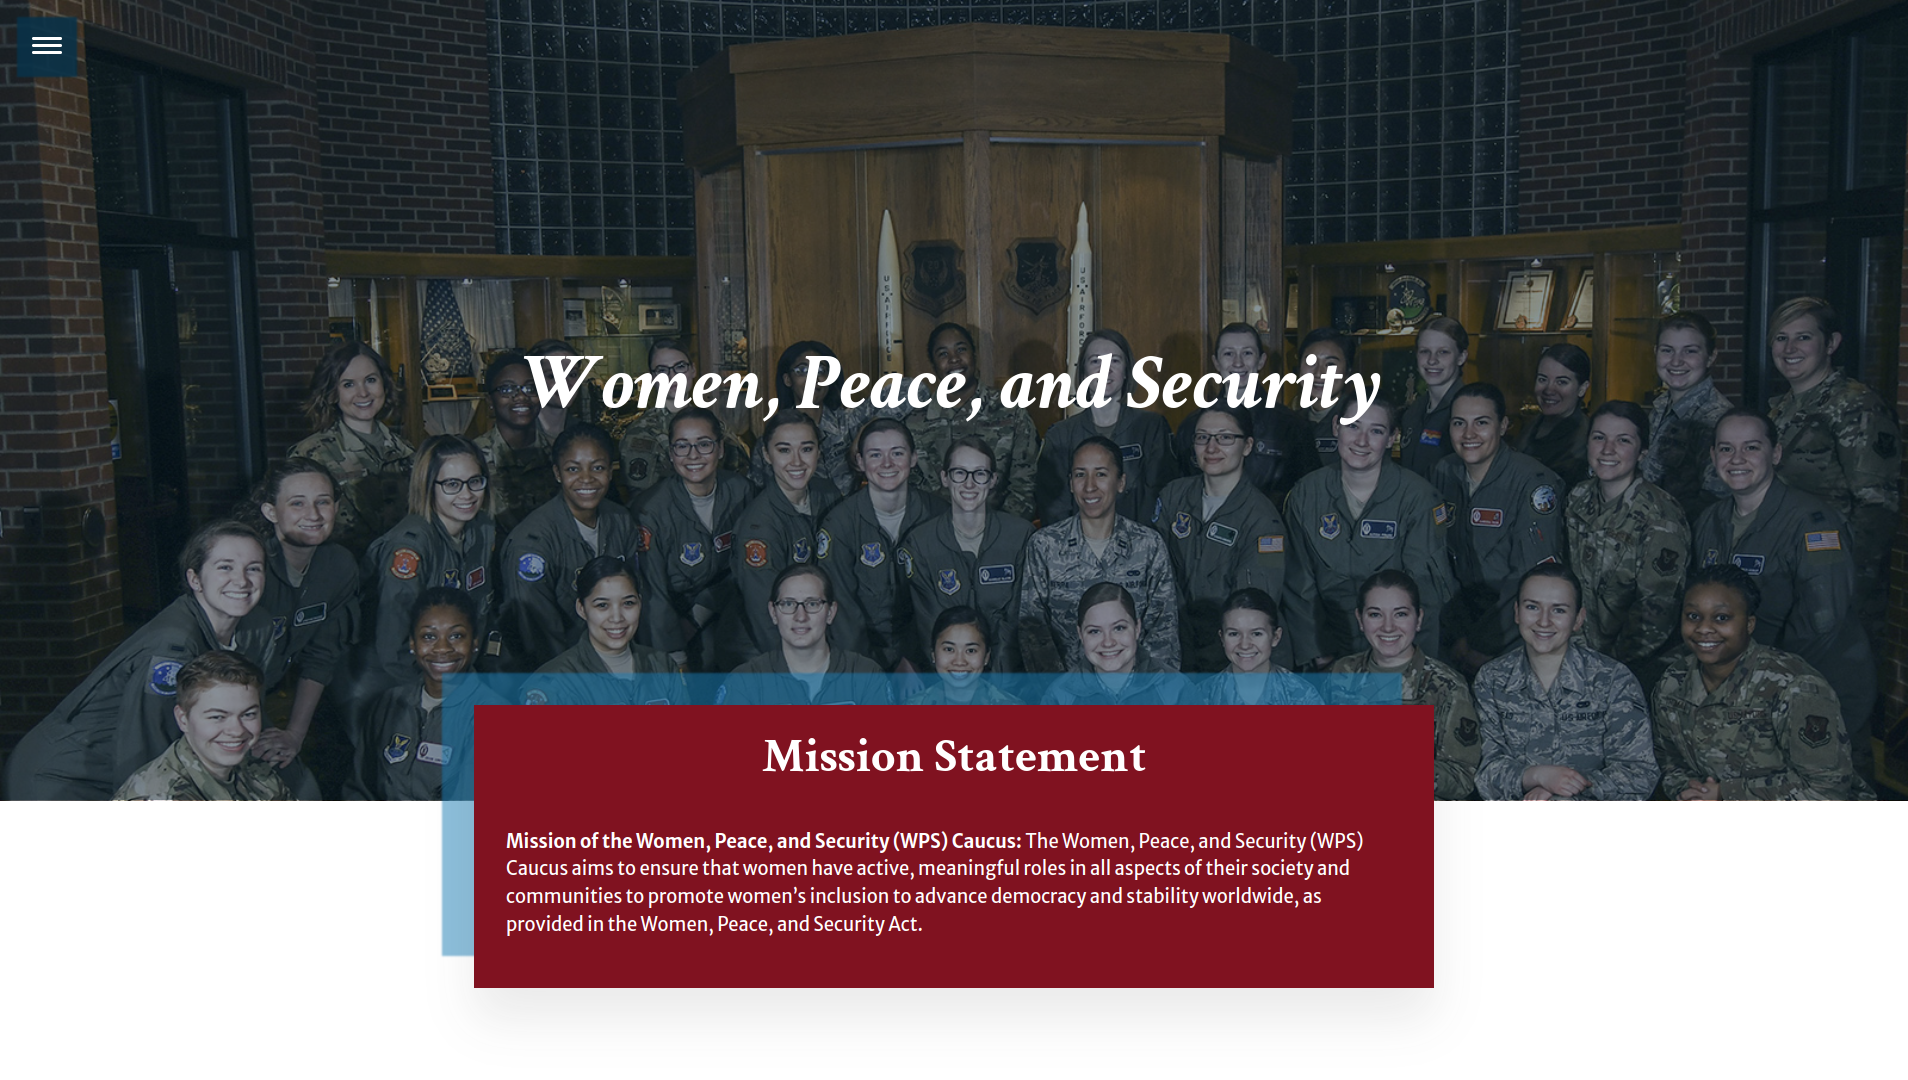 Women, Peace, and Security Caucus top of the page. A picture of women in uniform with the text Women, Peace, and Security on top and below that is a mission statement.